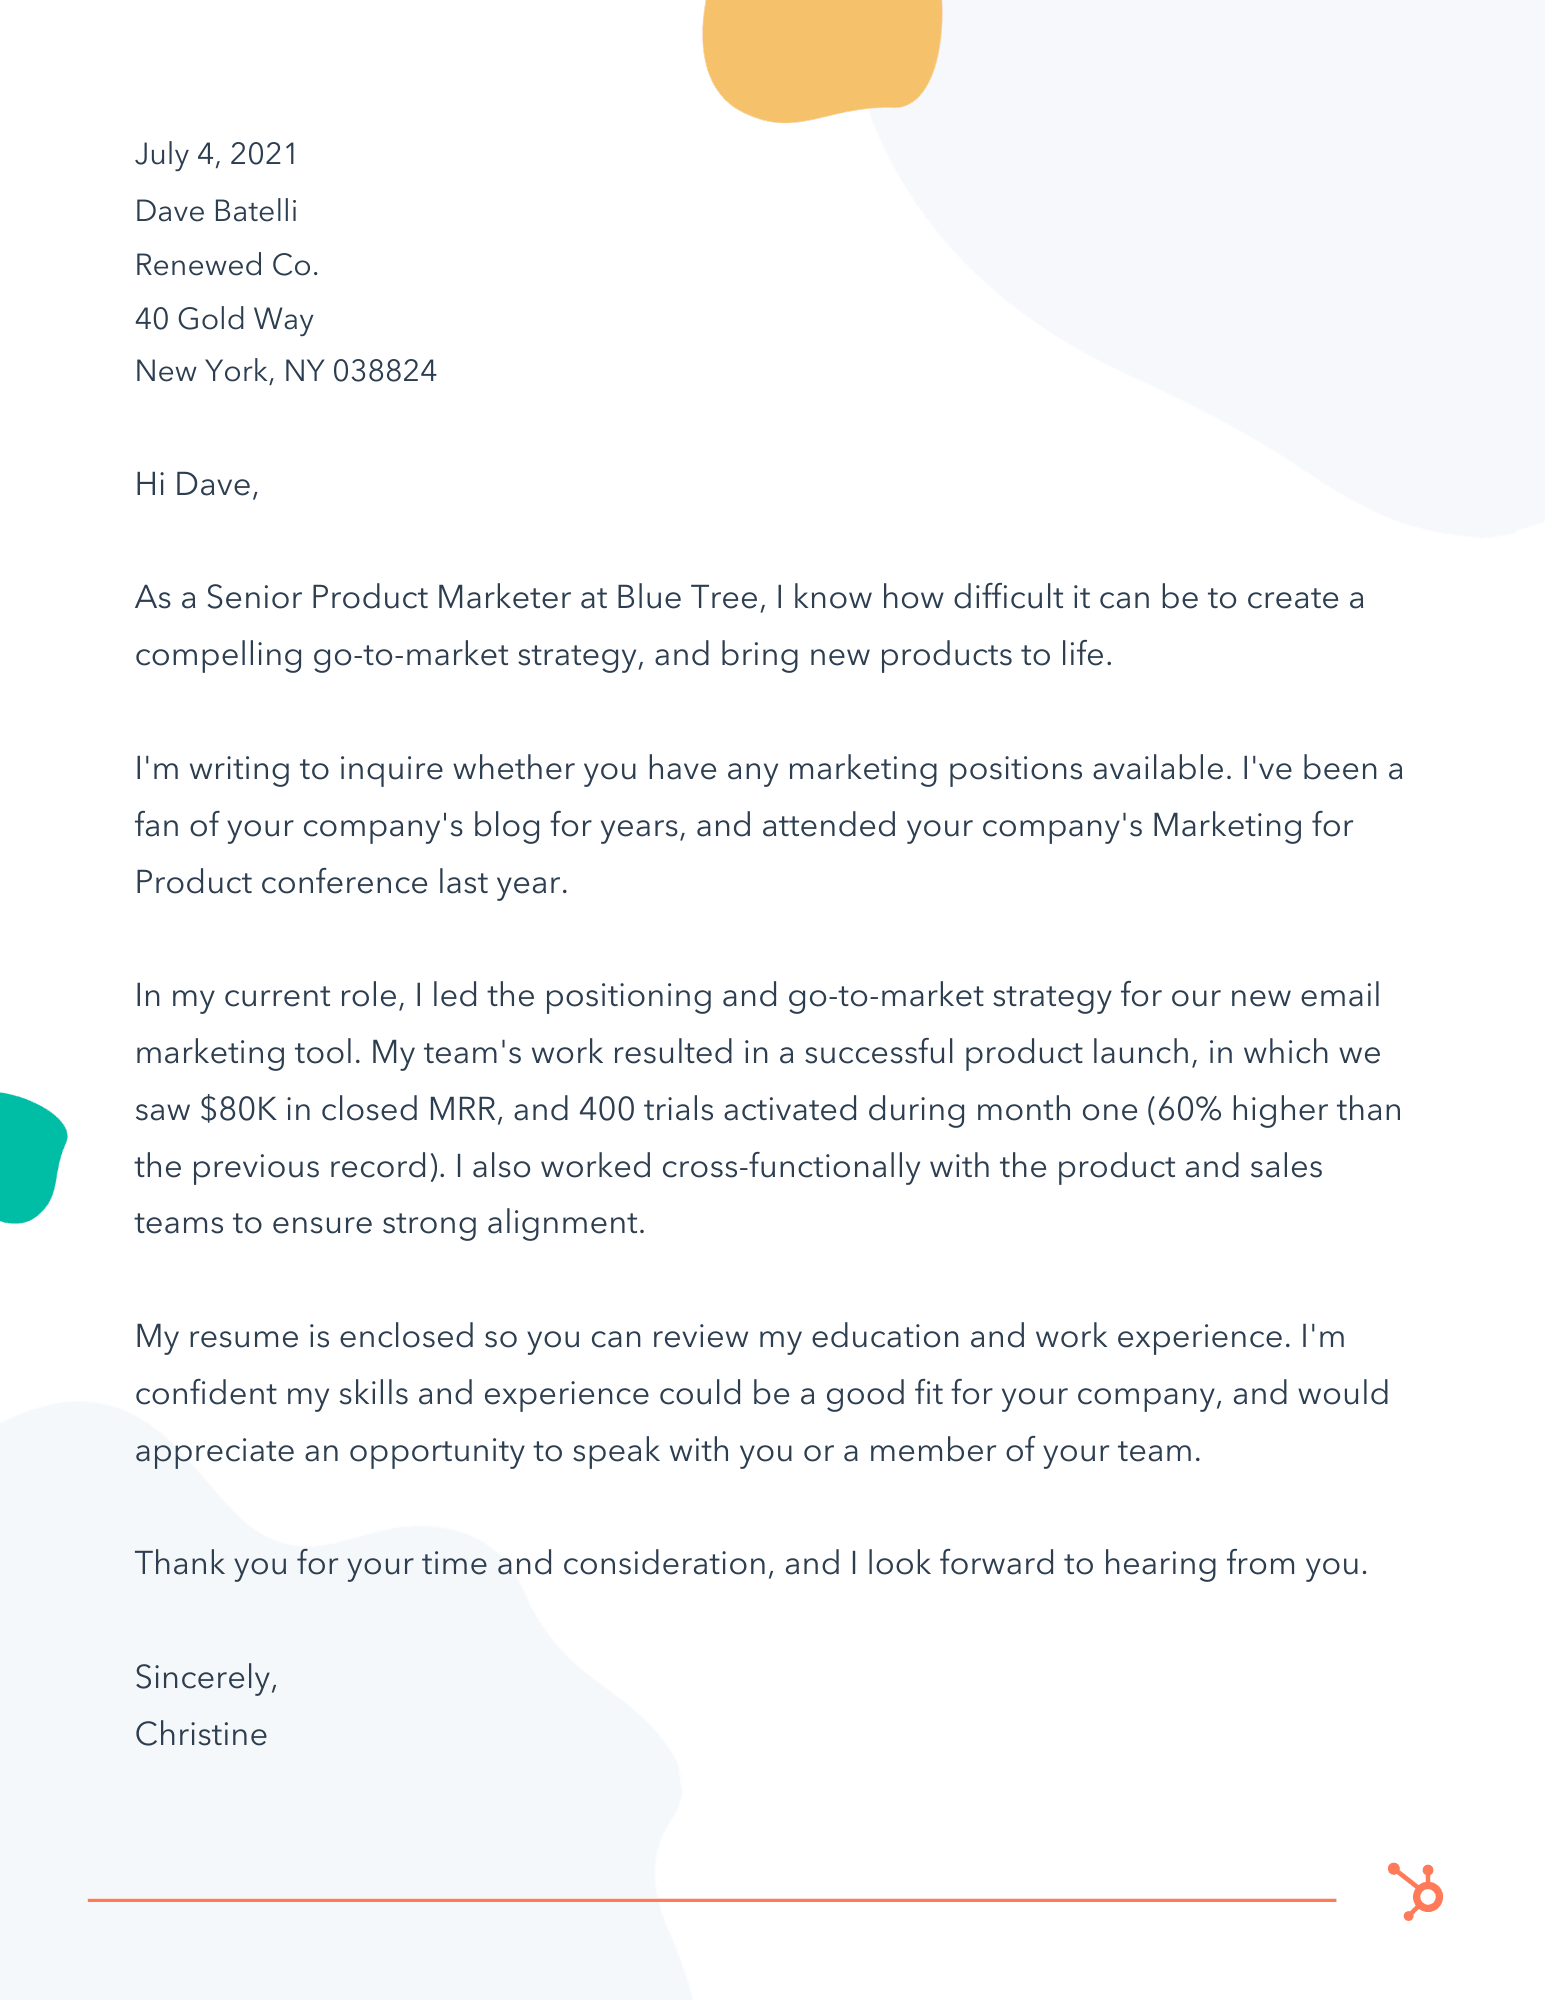 How to Write a Letter of Interest in 20 [Examples + Template]